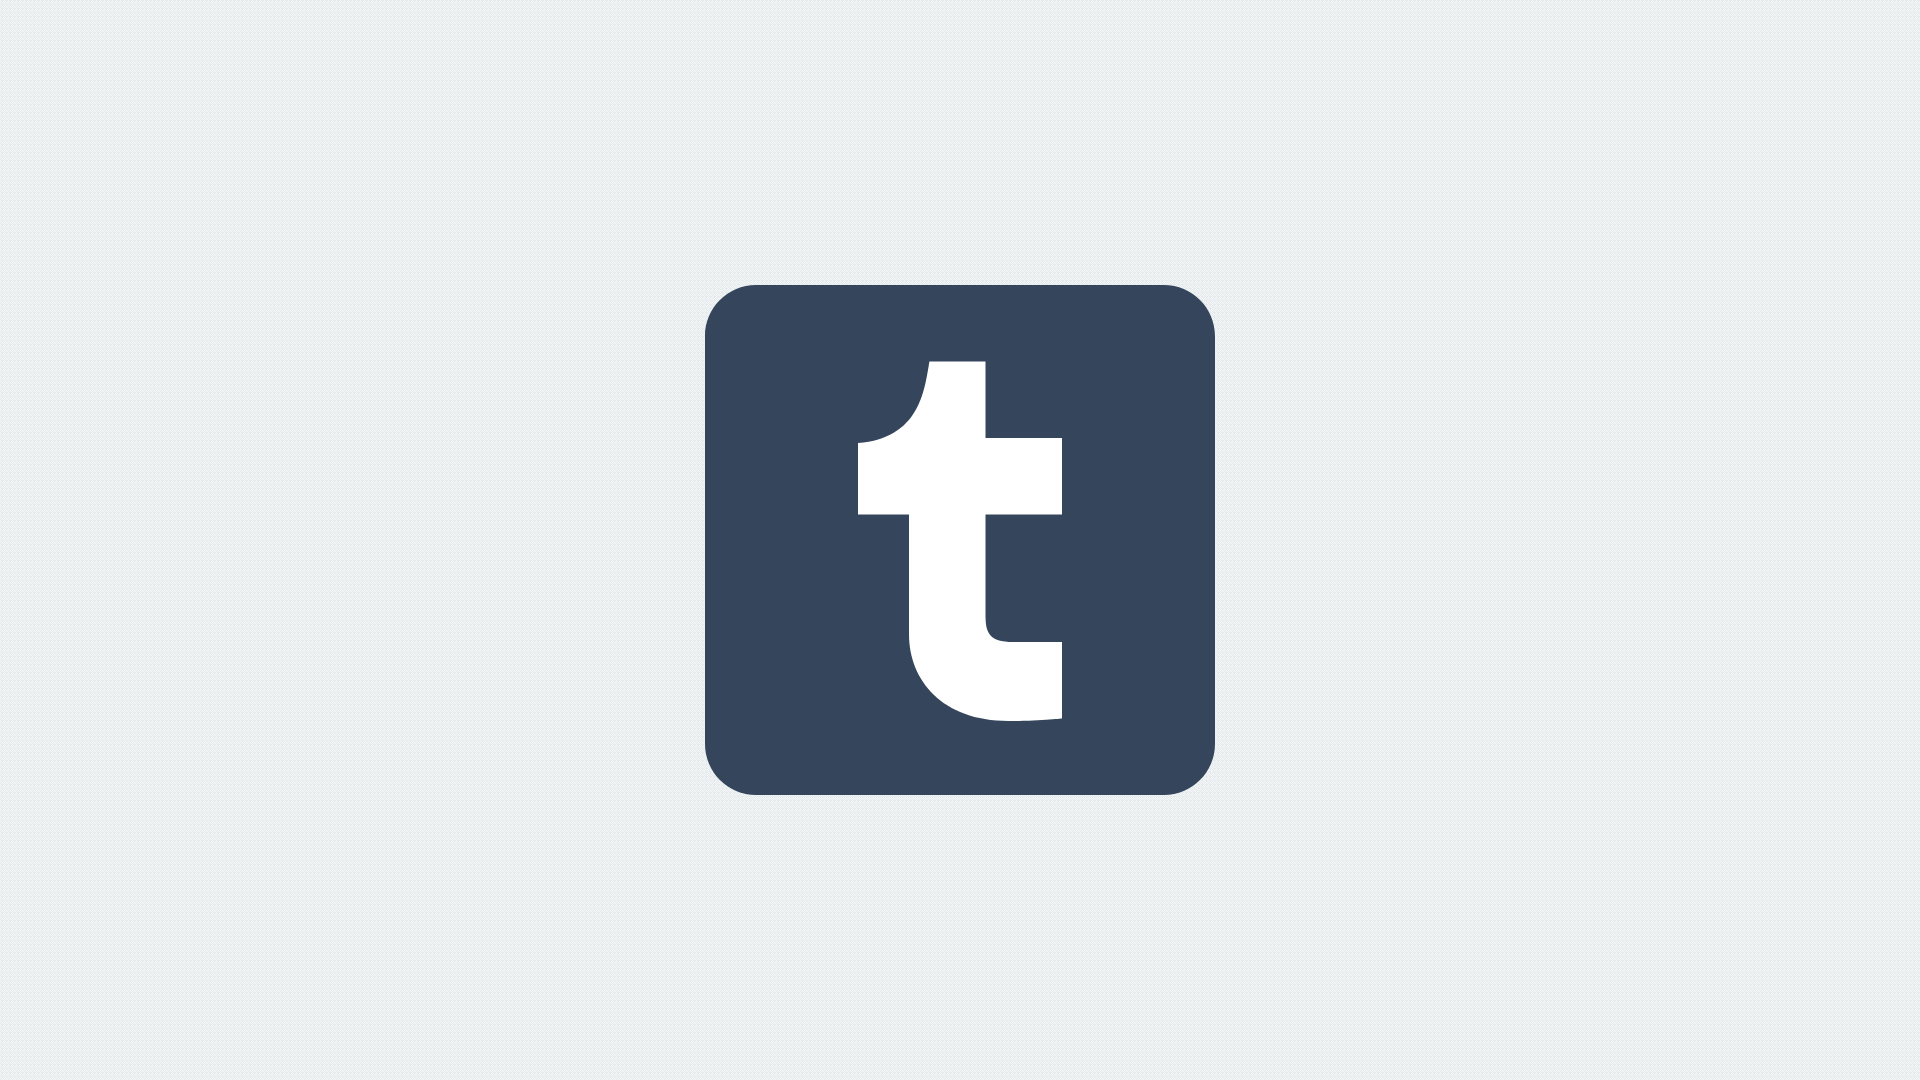 Animated GIF of the Tumblr logo shaking and falling down.